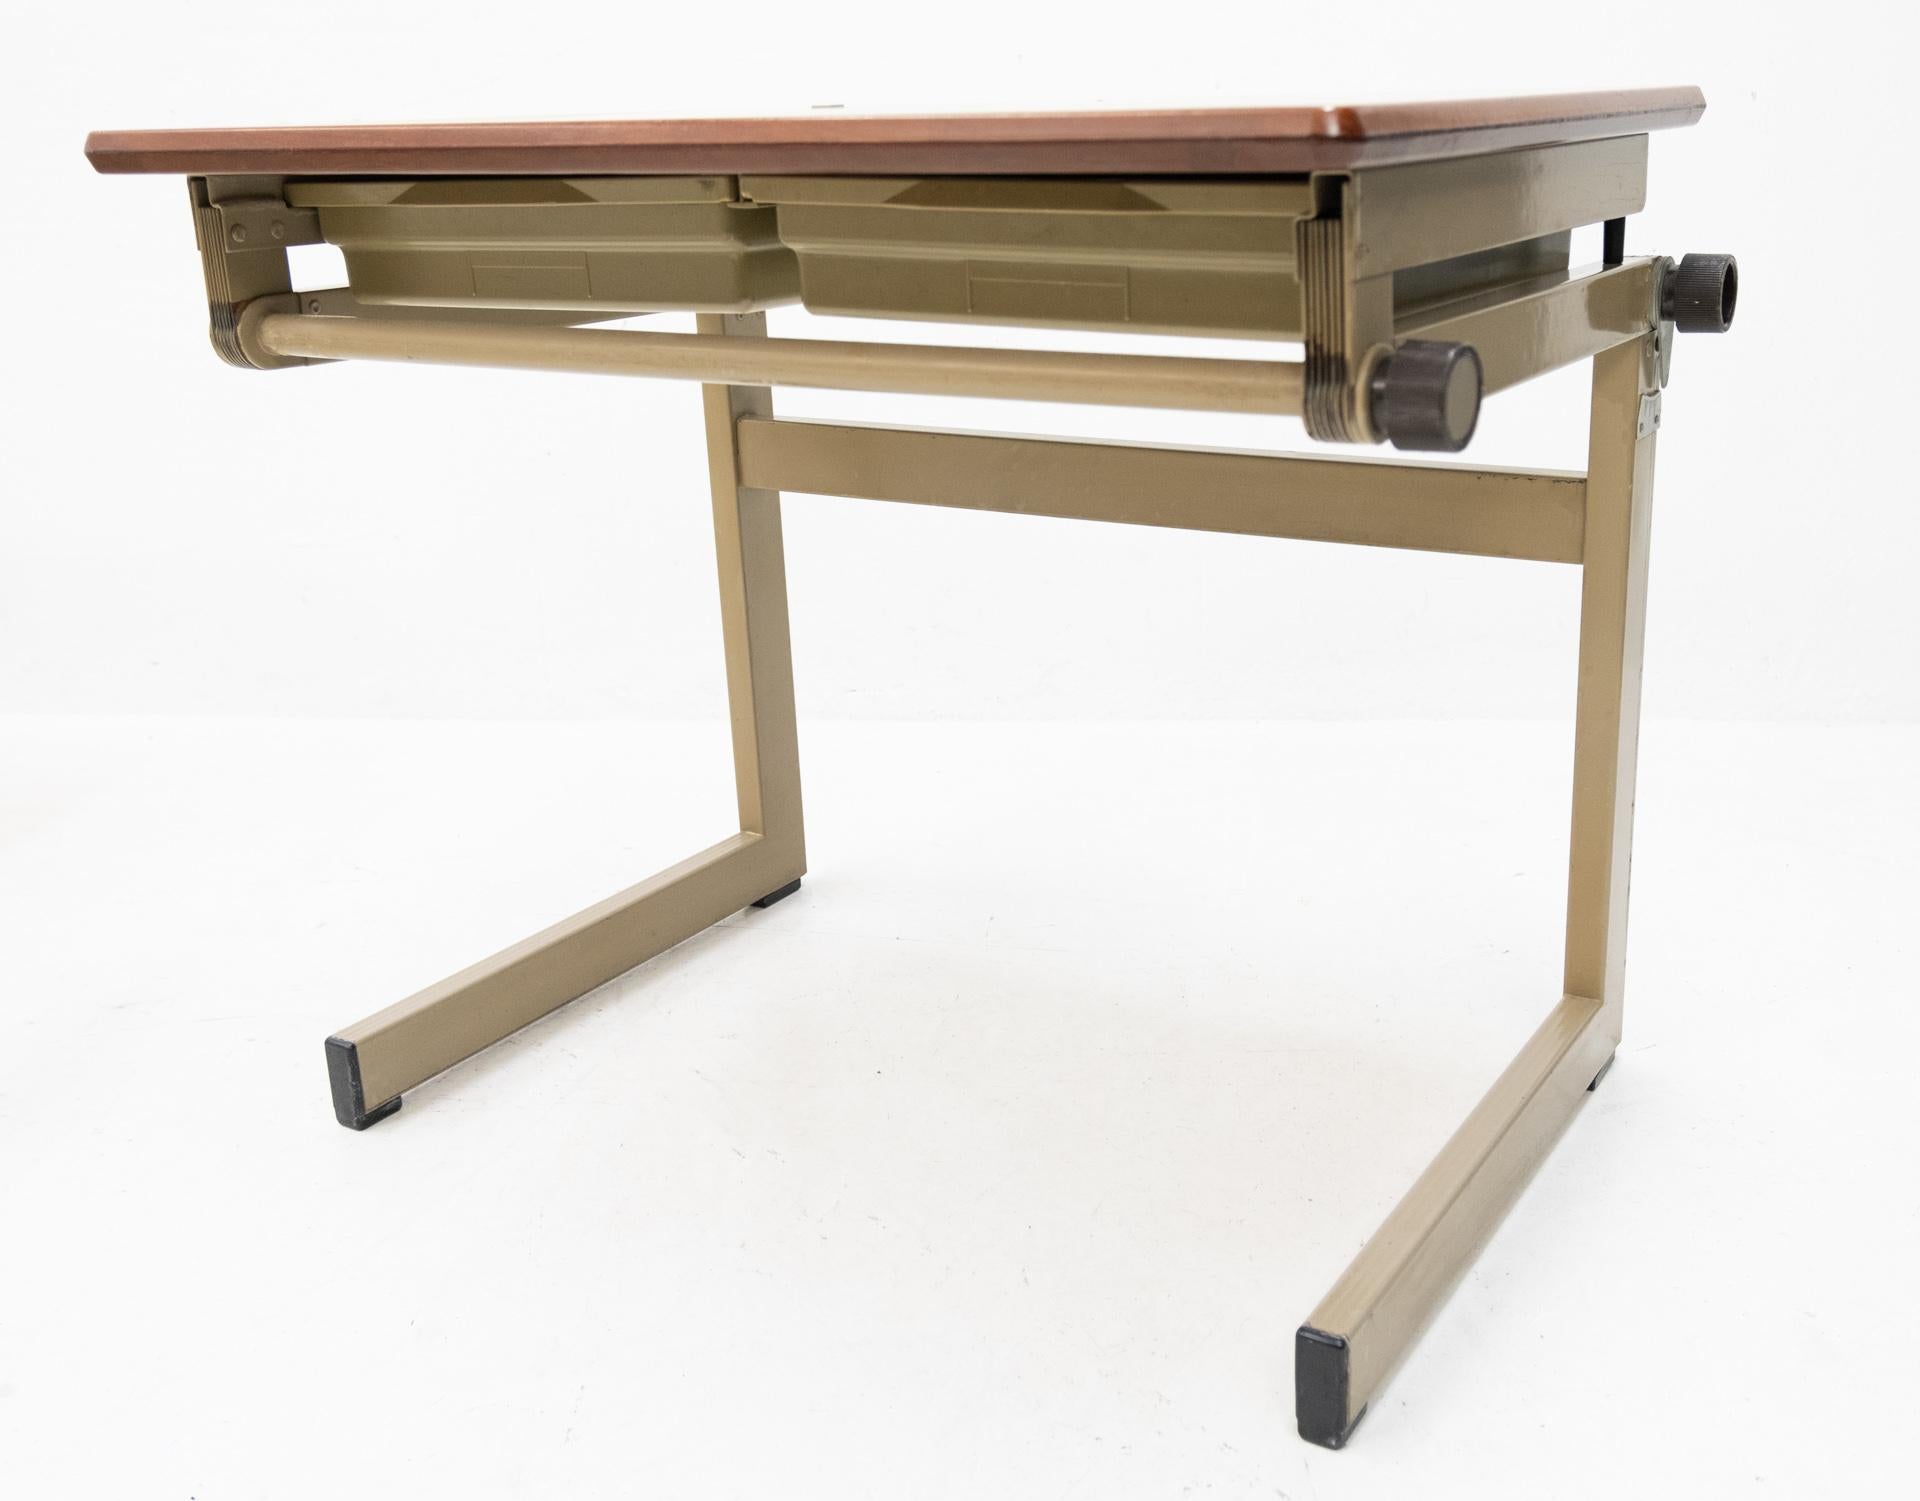 Small Industrial writing table. Marko Holland 1960s folding out. So you can work standing up.
Handy pin to hold the paper. Small in size, very handy in use. For the artist or architect or student.
Brown resin top. Two drawers. Good working